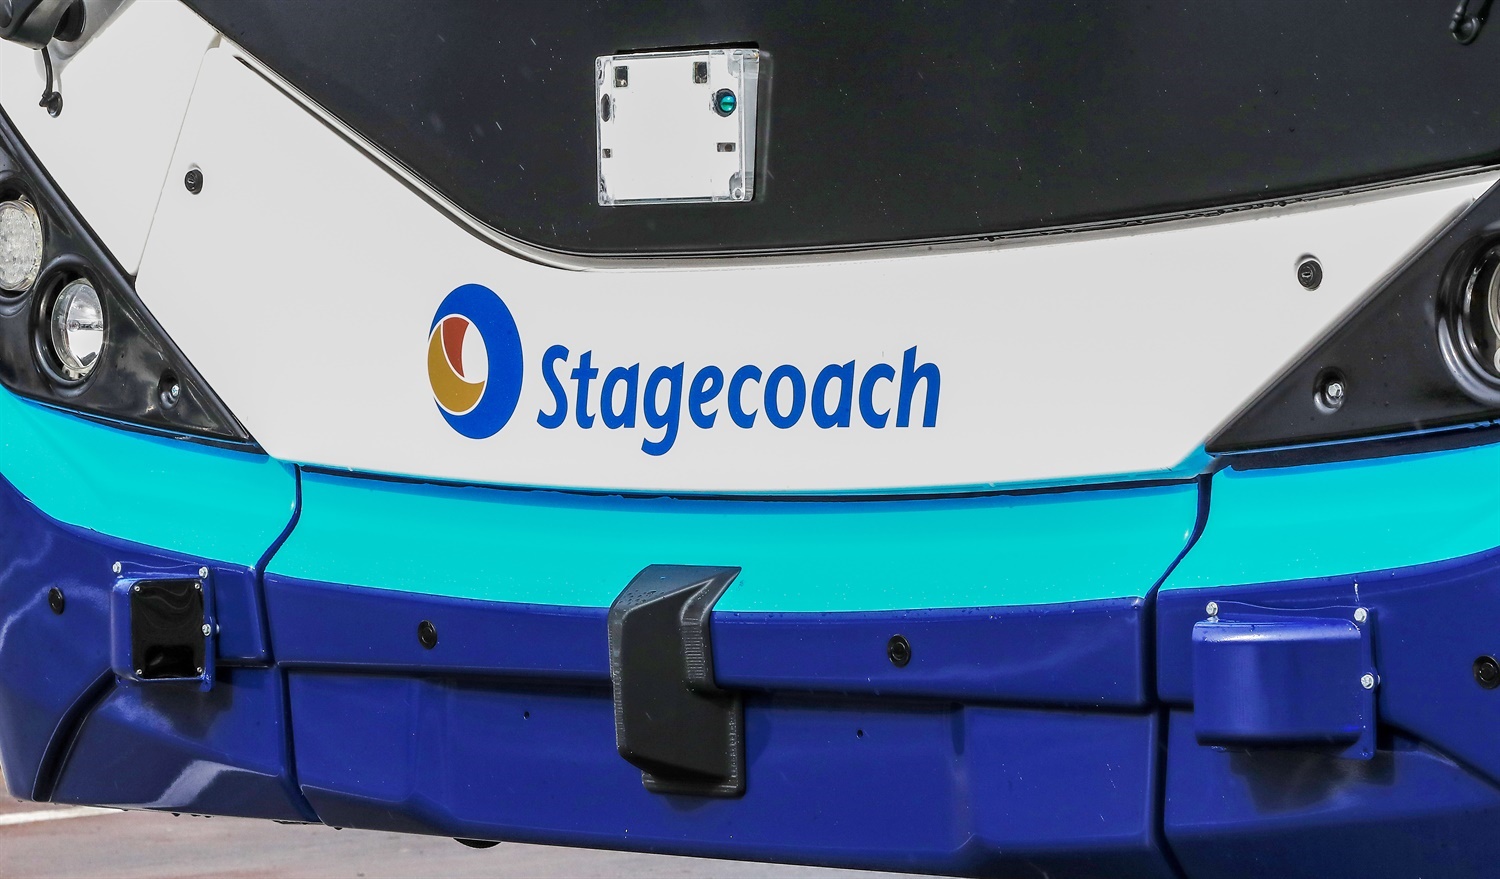 Stagecoach launches legal action against government over rail franchise disqualification